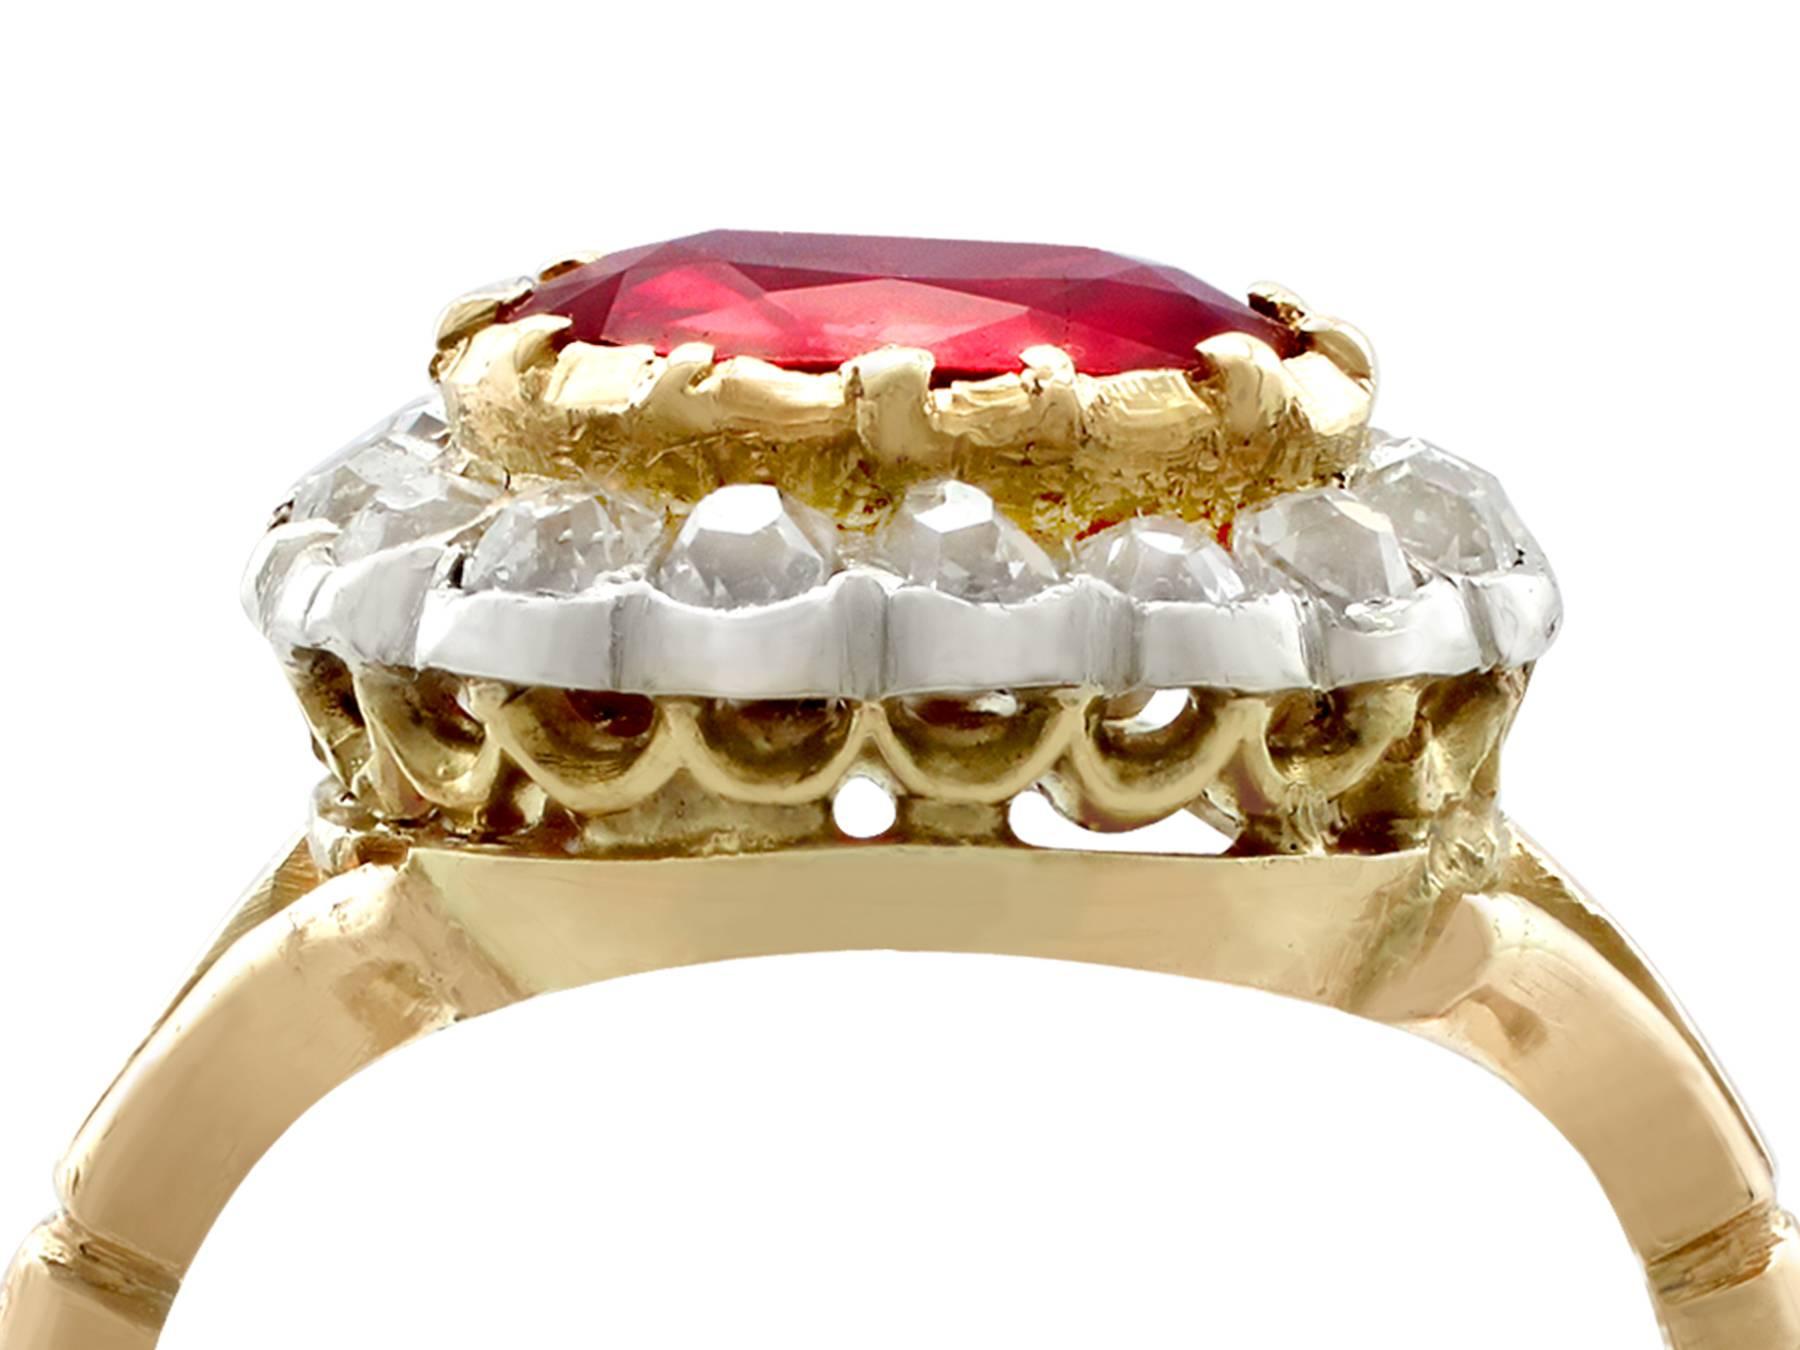 A stunning, fine and impressive antique 1.50 carat ruby and 0.60 carat diamond, 18 karat yellow gold, 18 karat white gold set cluster ring; part of our antique jewelry and estate jewelry collections

This stunning, fine and impressive antique ruby